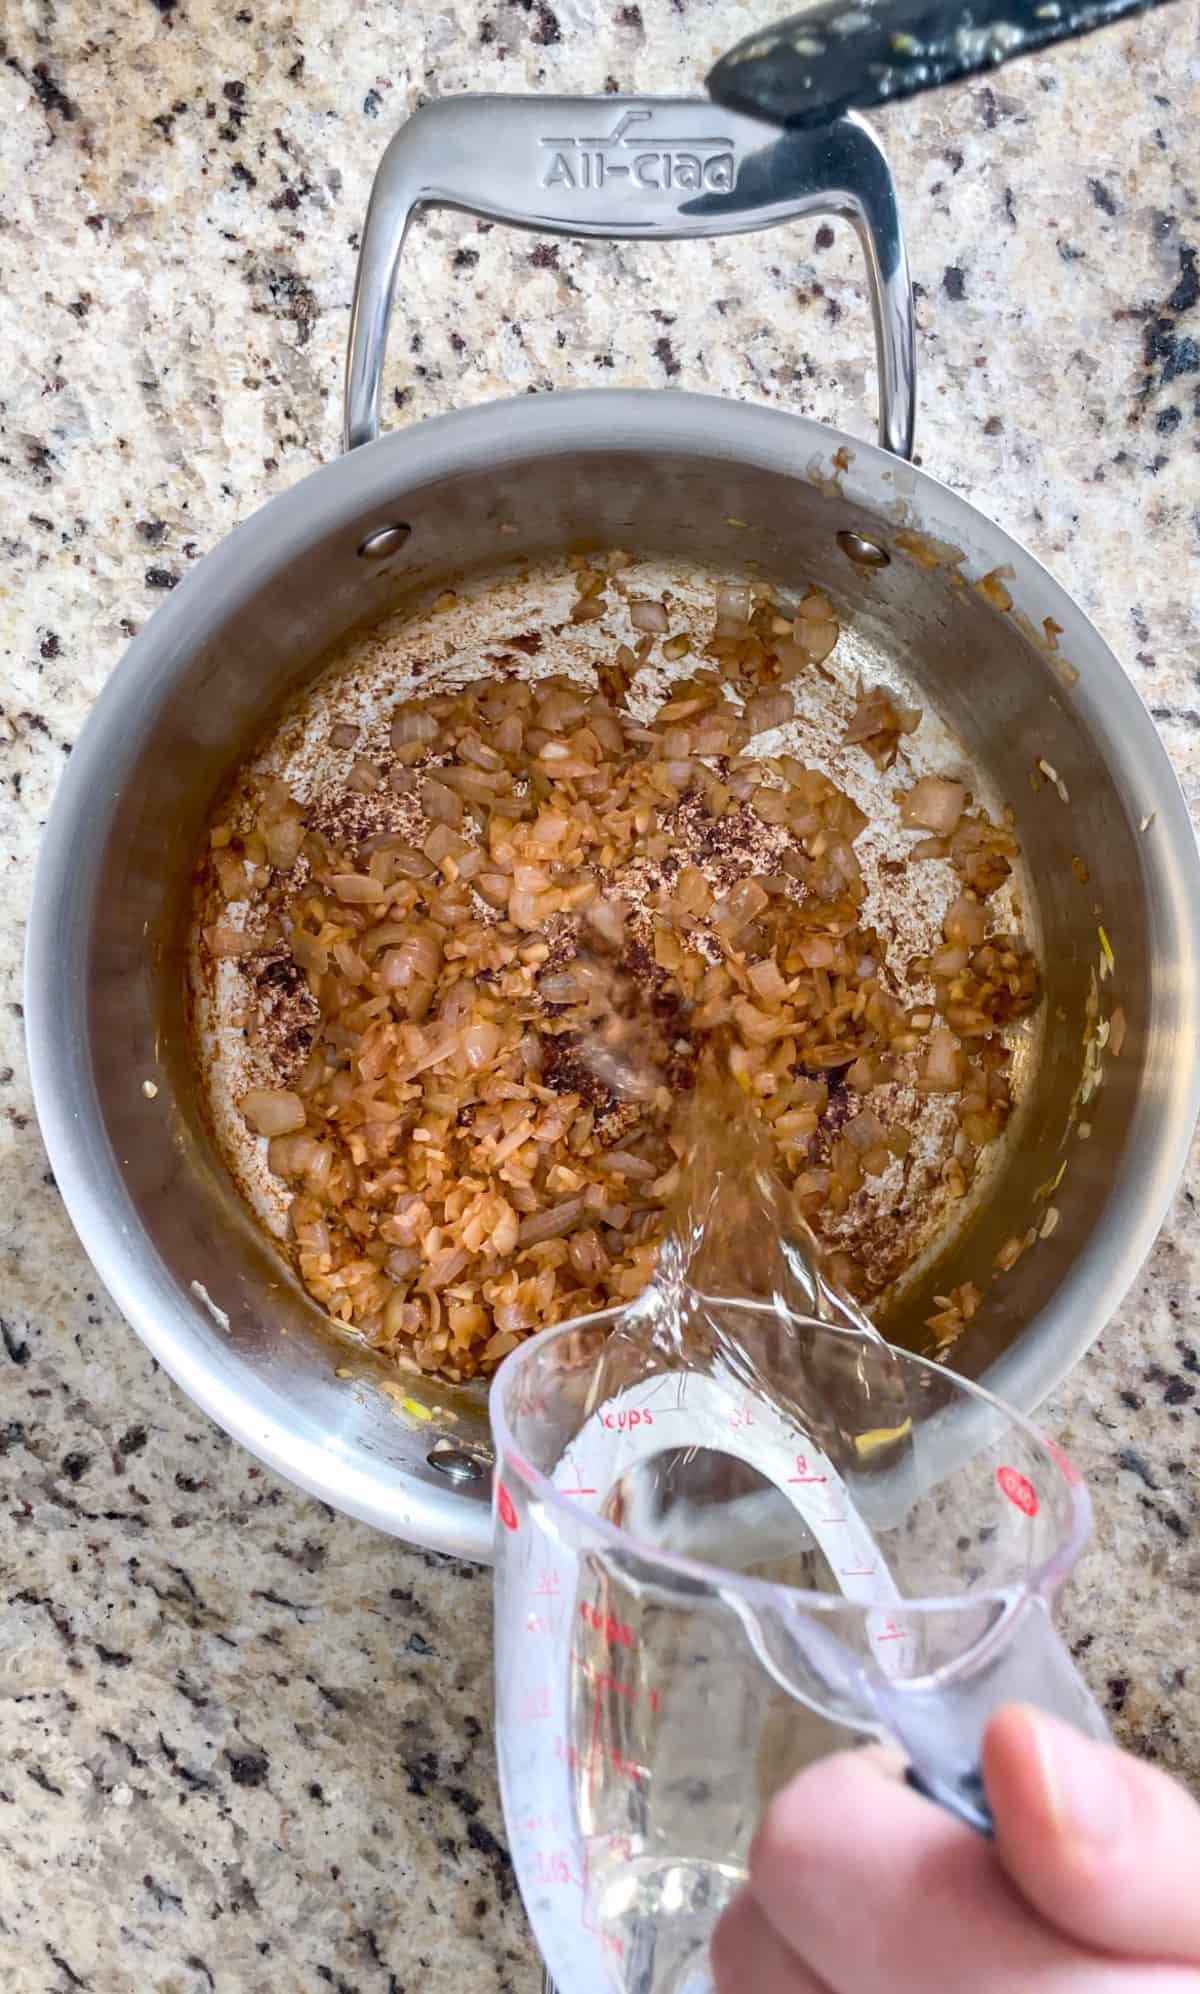 Champagne being poured into the caramelized shallots.